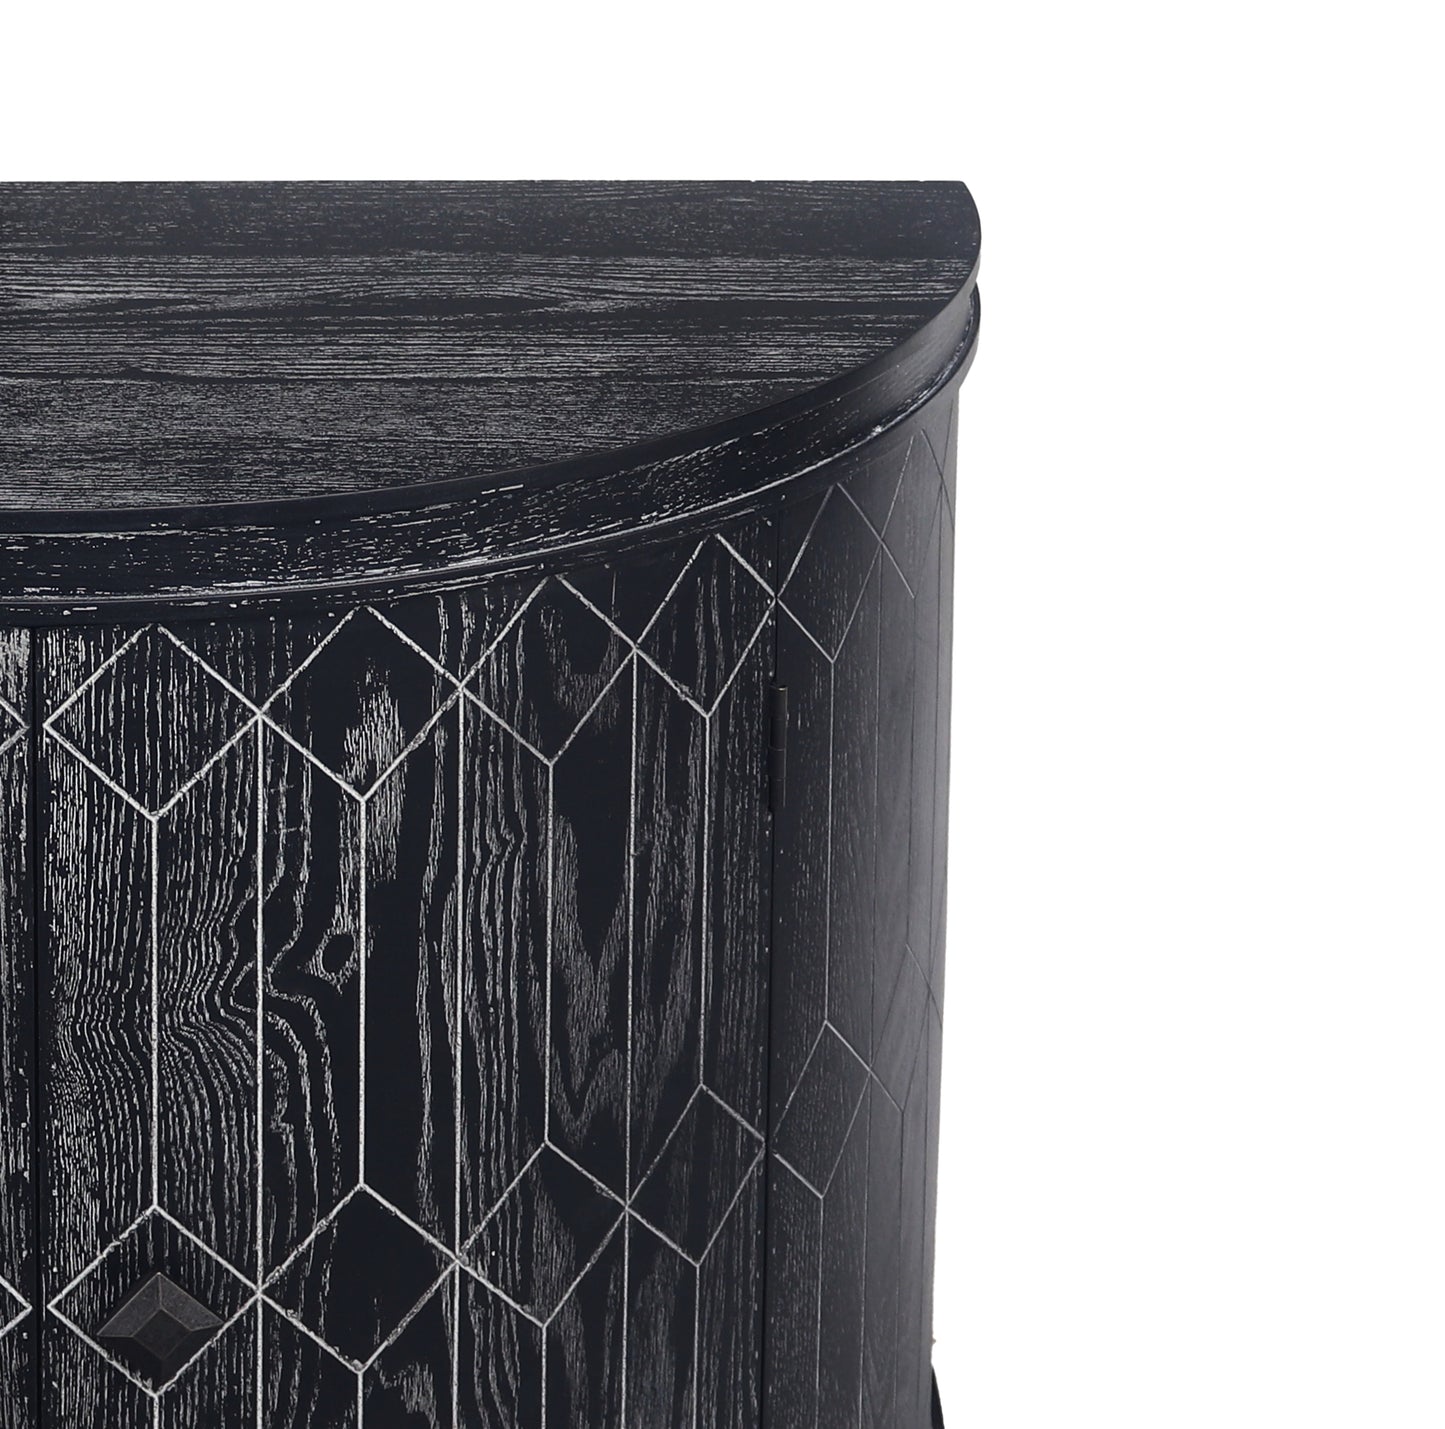 Contemporary Elegance: Black Half-moon Accent Storage Cabinet with Solid Wood Veneer. This statement piece, perfect for living spaces, features two-tiered organization with a modern touch and convenient access.